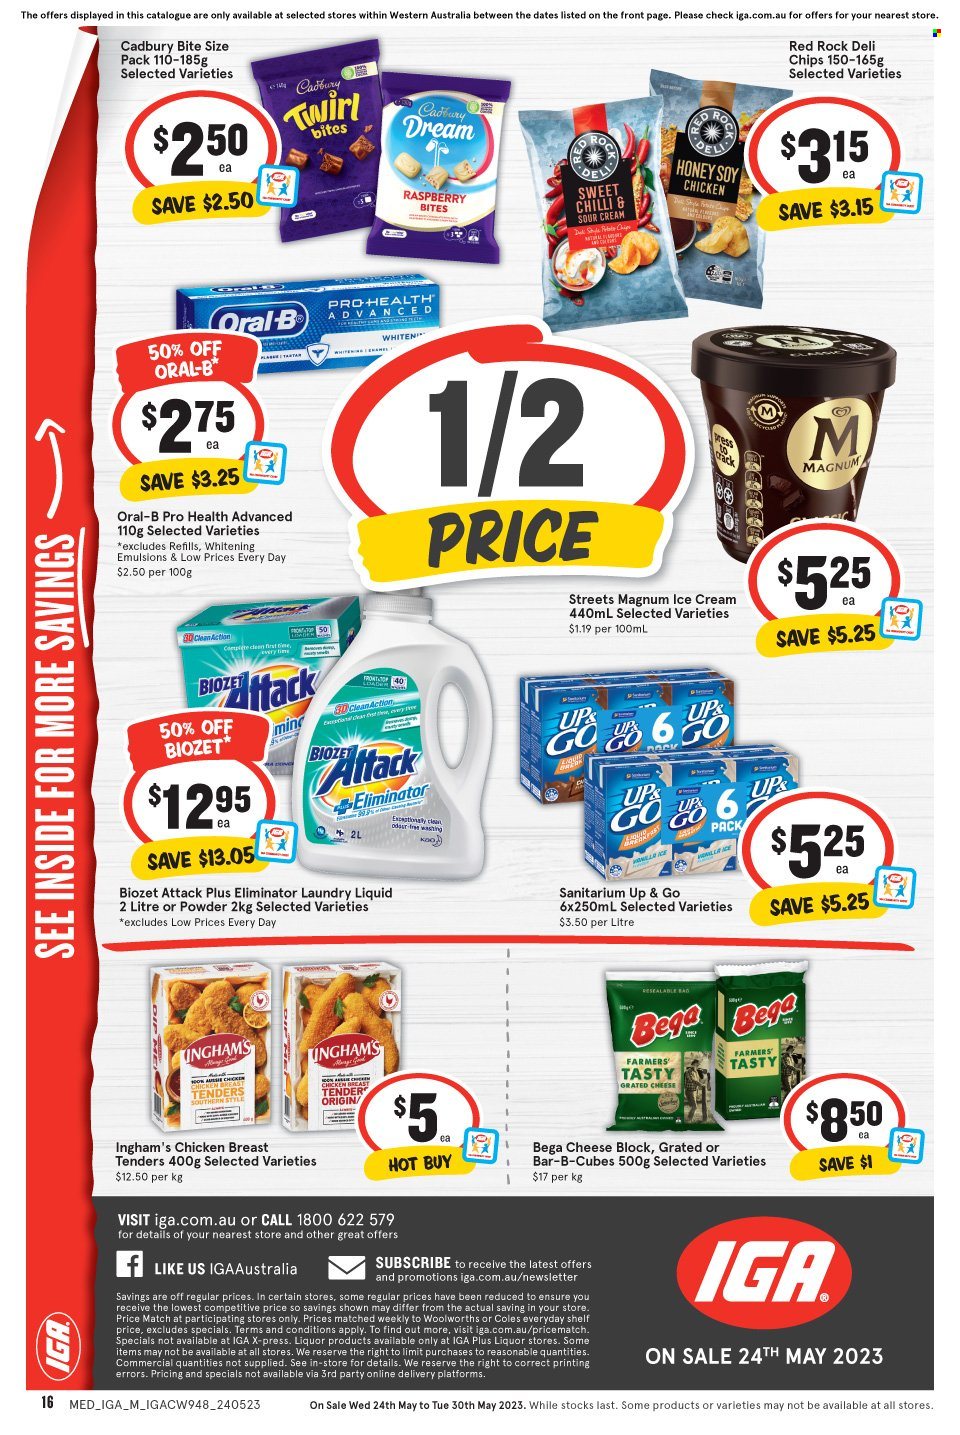 thumbnail - IGA Catalogue - 24 May 2023 - 30 May 2023 - Sales products - chicken tenders, grated cheese, sour cream, Magnum, ice cream, Cadbury, potato chips, chips, Koo, honey, chicken, laundry detergent, Oral-B, Aussie, BETA. Page 2.